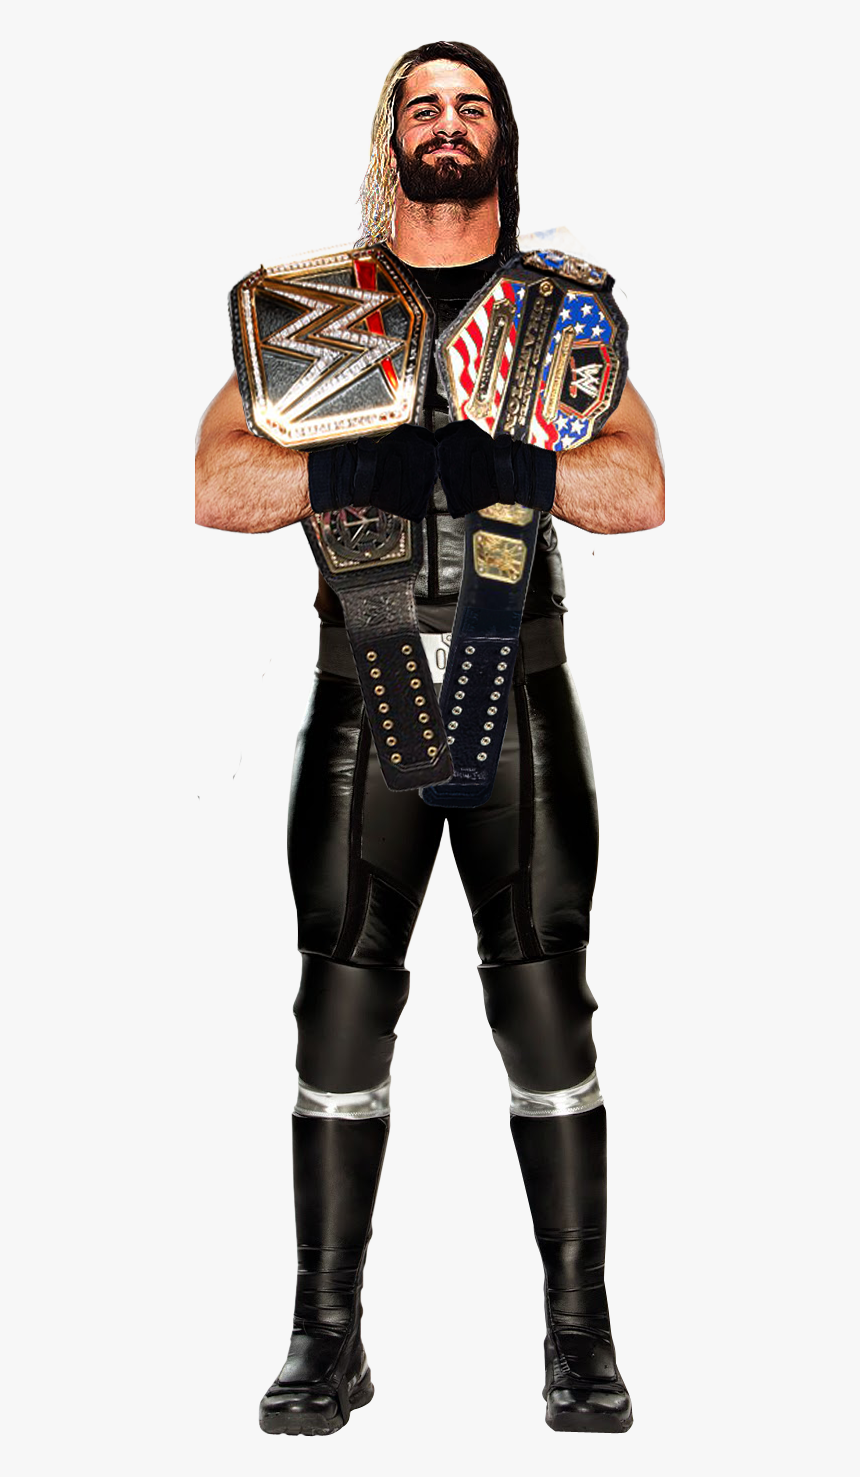 Seth Rollins Wwe Wh Usa Champion Photomontage By Tobiasstriker, HD Png Download, Free Download